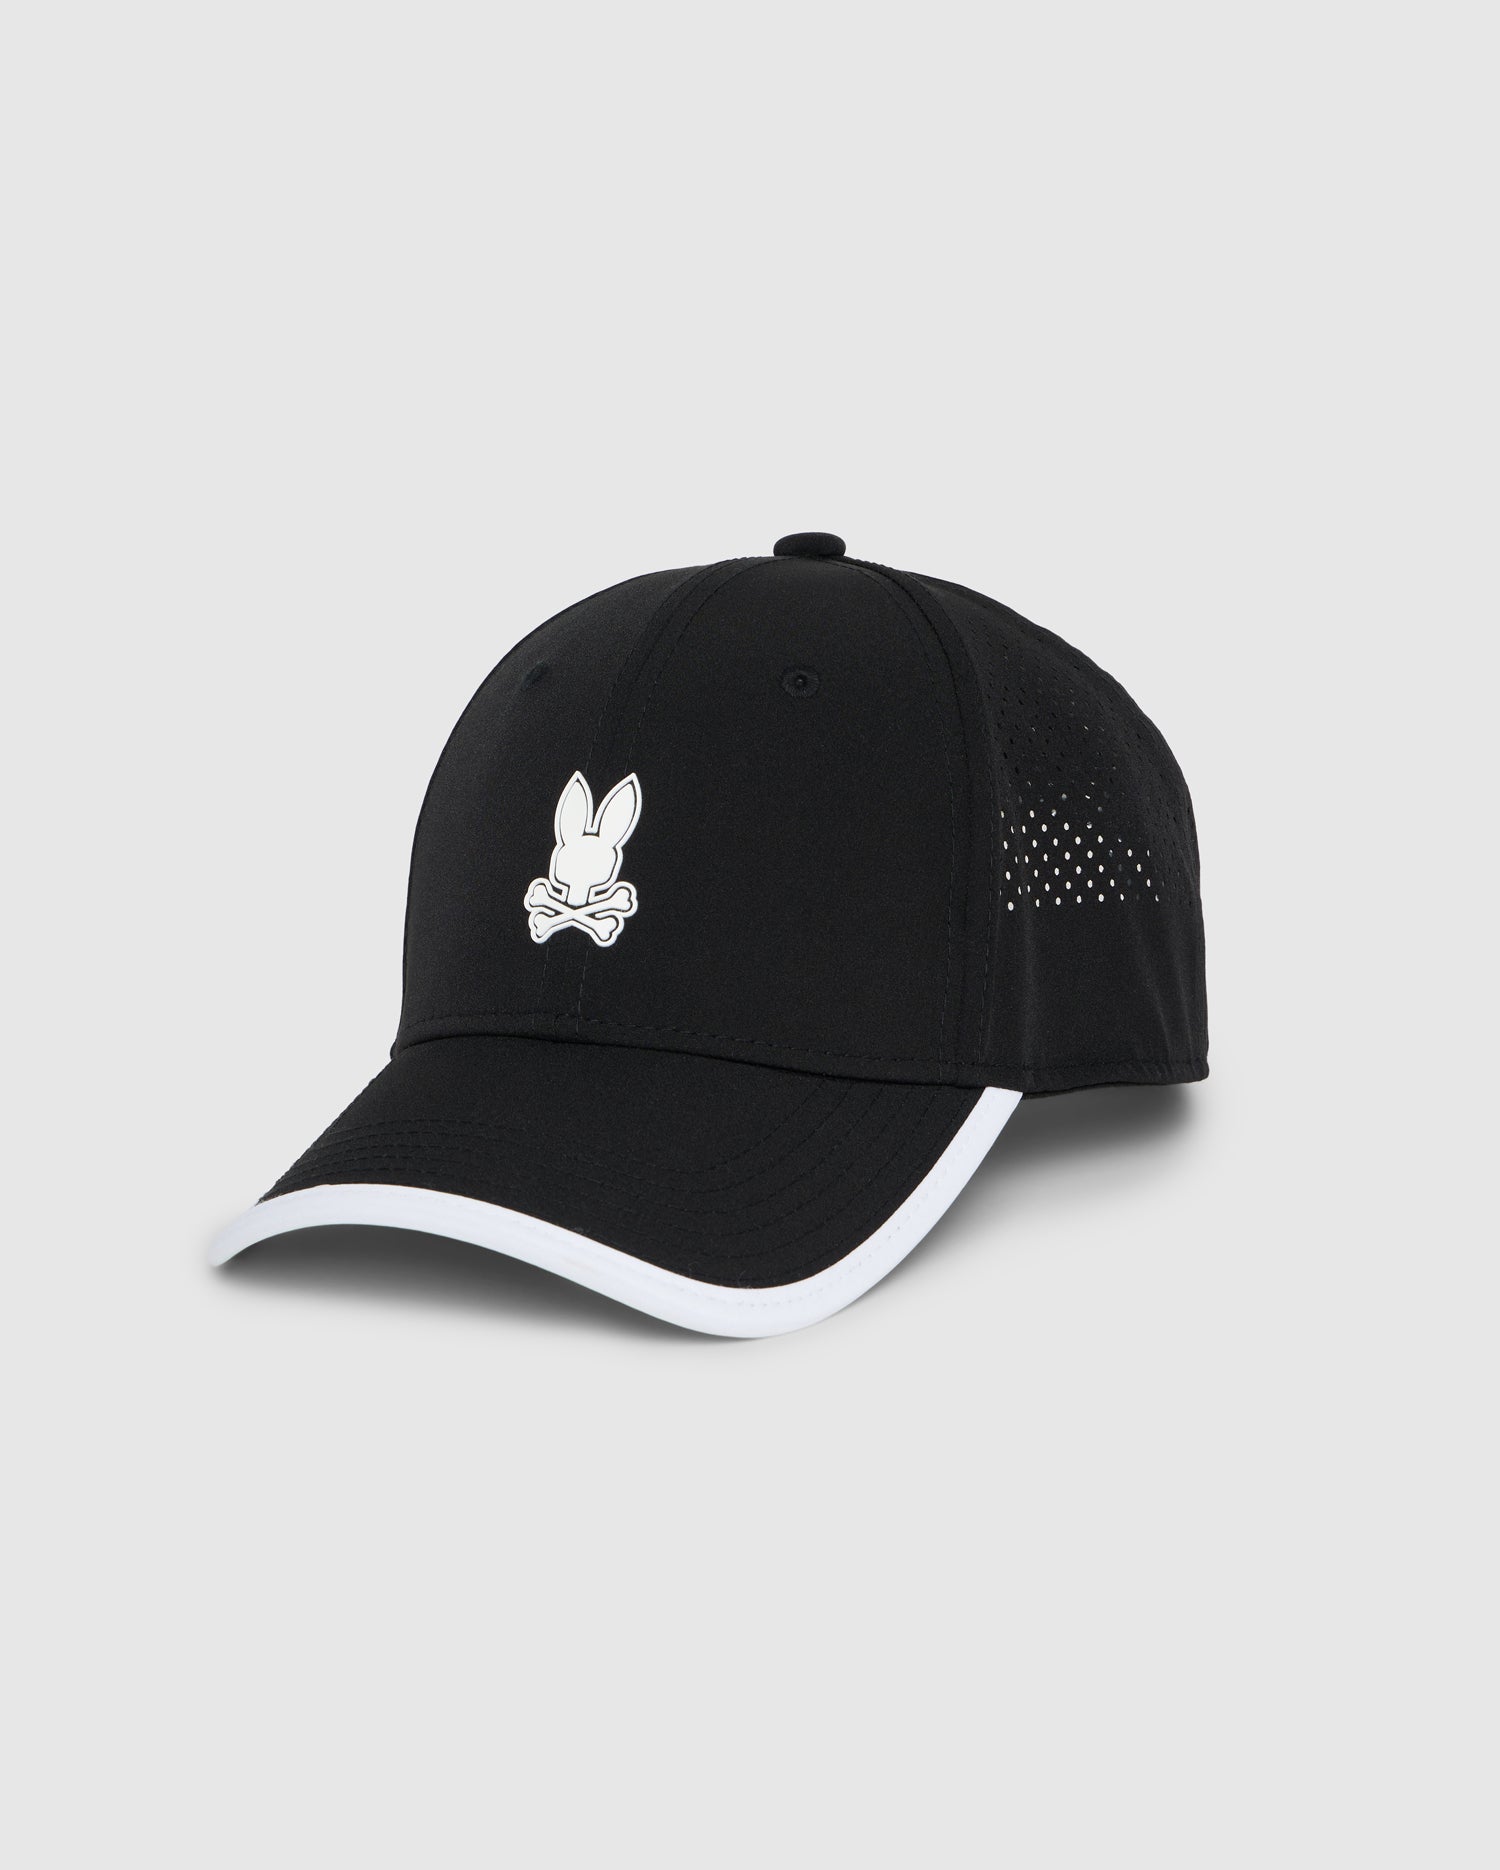 A black Psycho Bunny MENS LUCAS SPORT CAP - B6A590C200 featuring a white outline of a rabbit's head on the front. The performance-driven cap has white trim along the edge of the bill, small ventilation holes on the sides, and moisture-wicking fabric. The background is light gray.